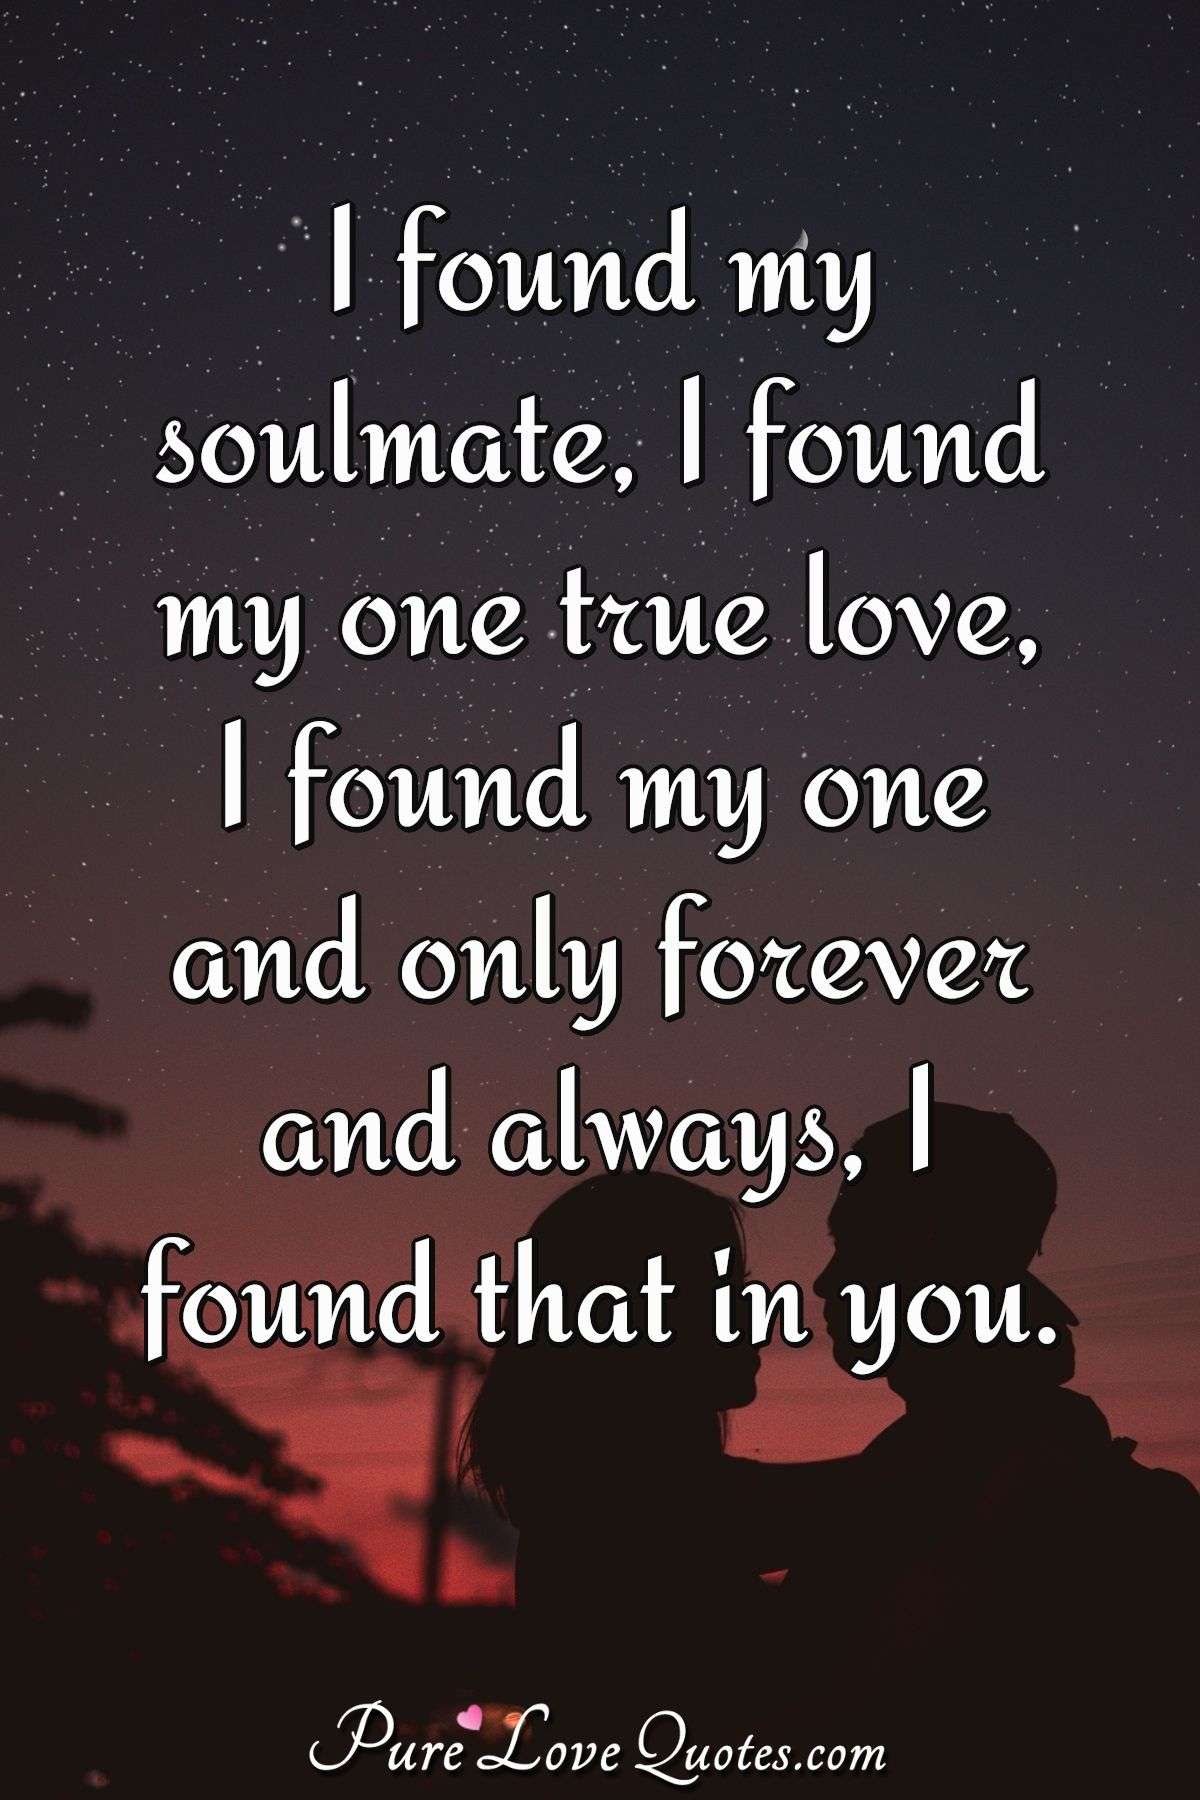 You are my soulmate forever